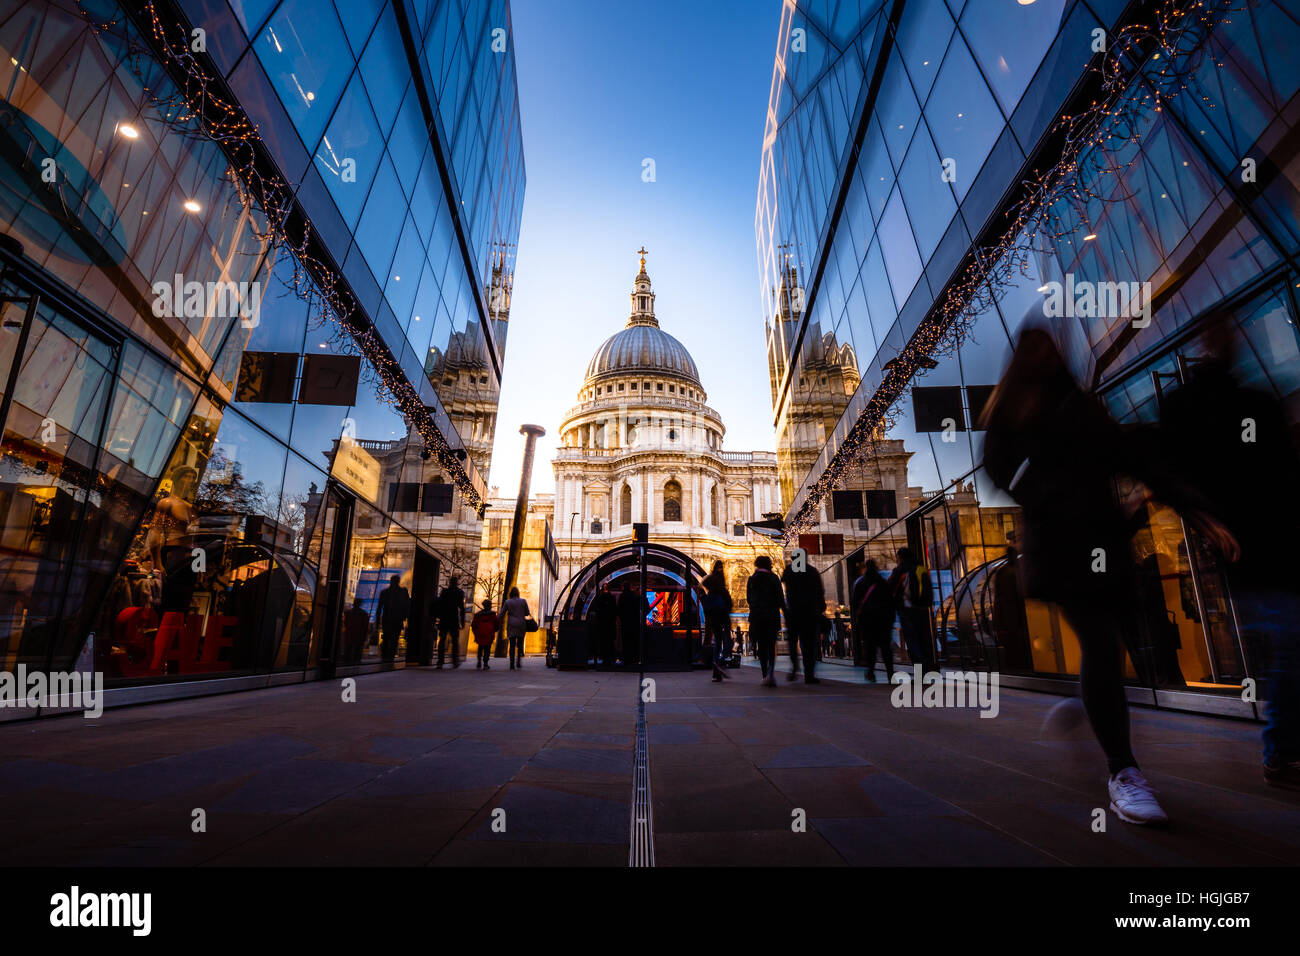 View of St. Paul's Cathedral from One New Change Mall with Shoppers, London, United Kingdom Stock Photo